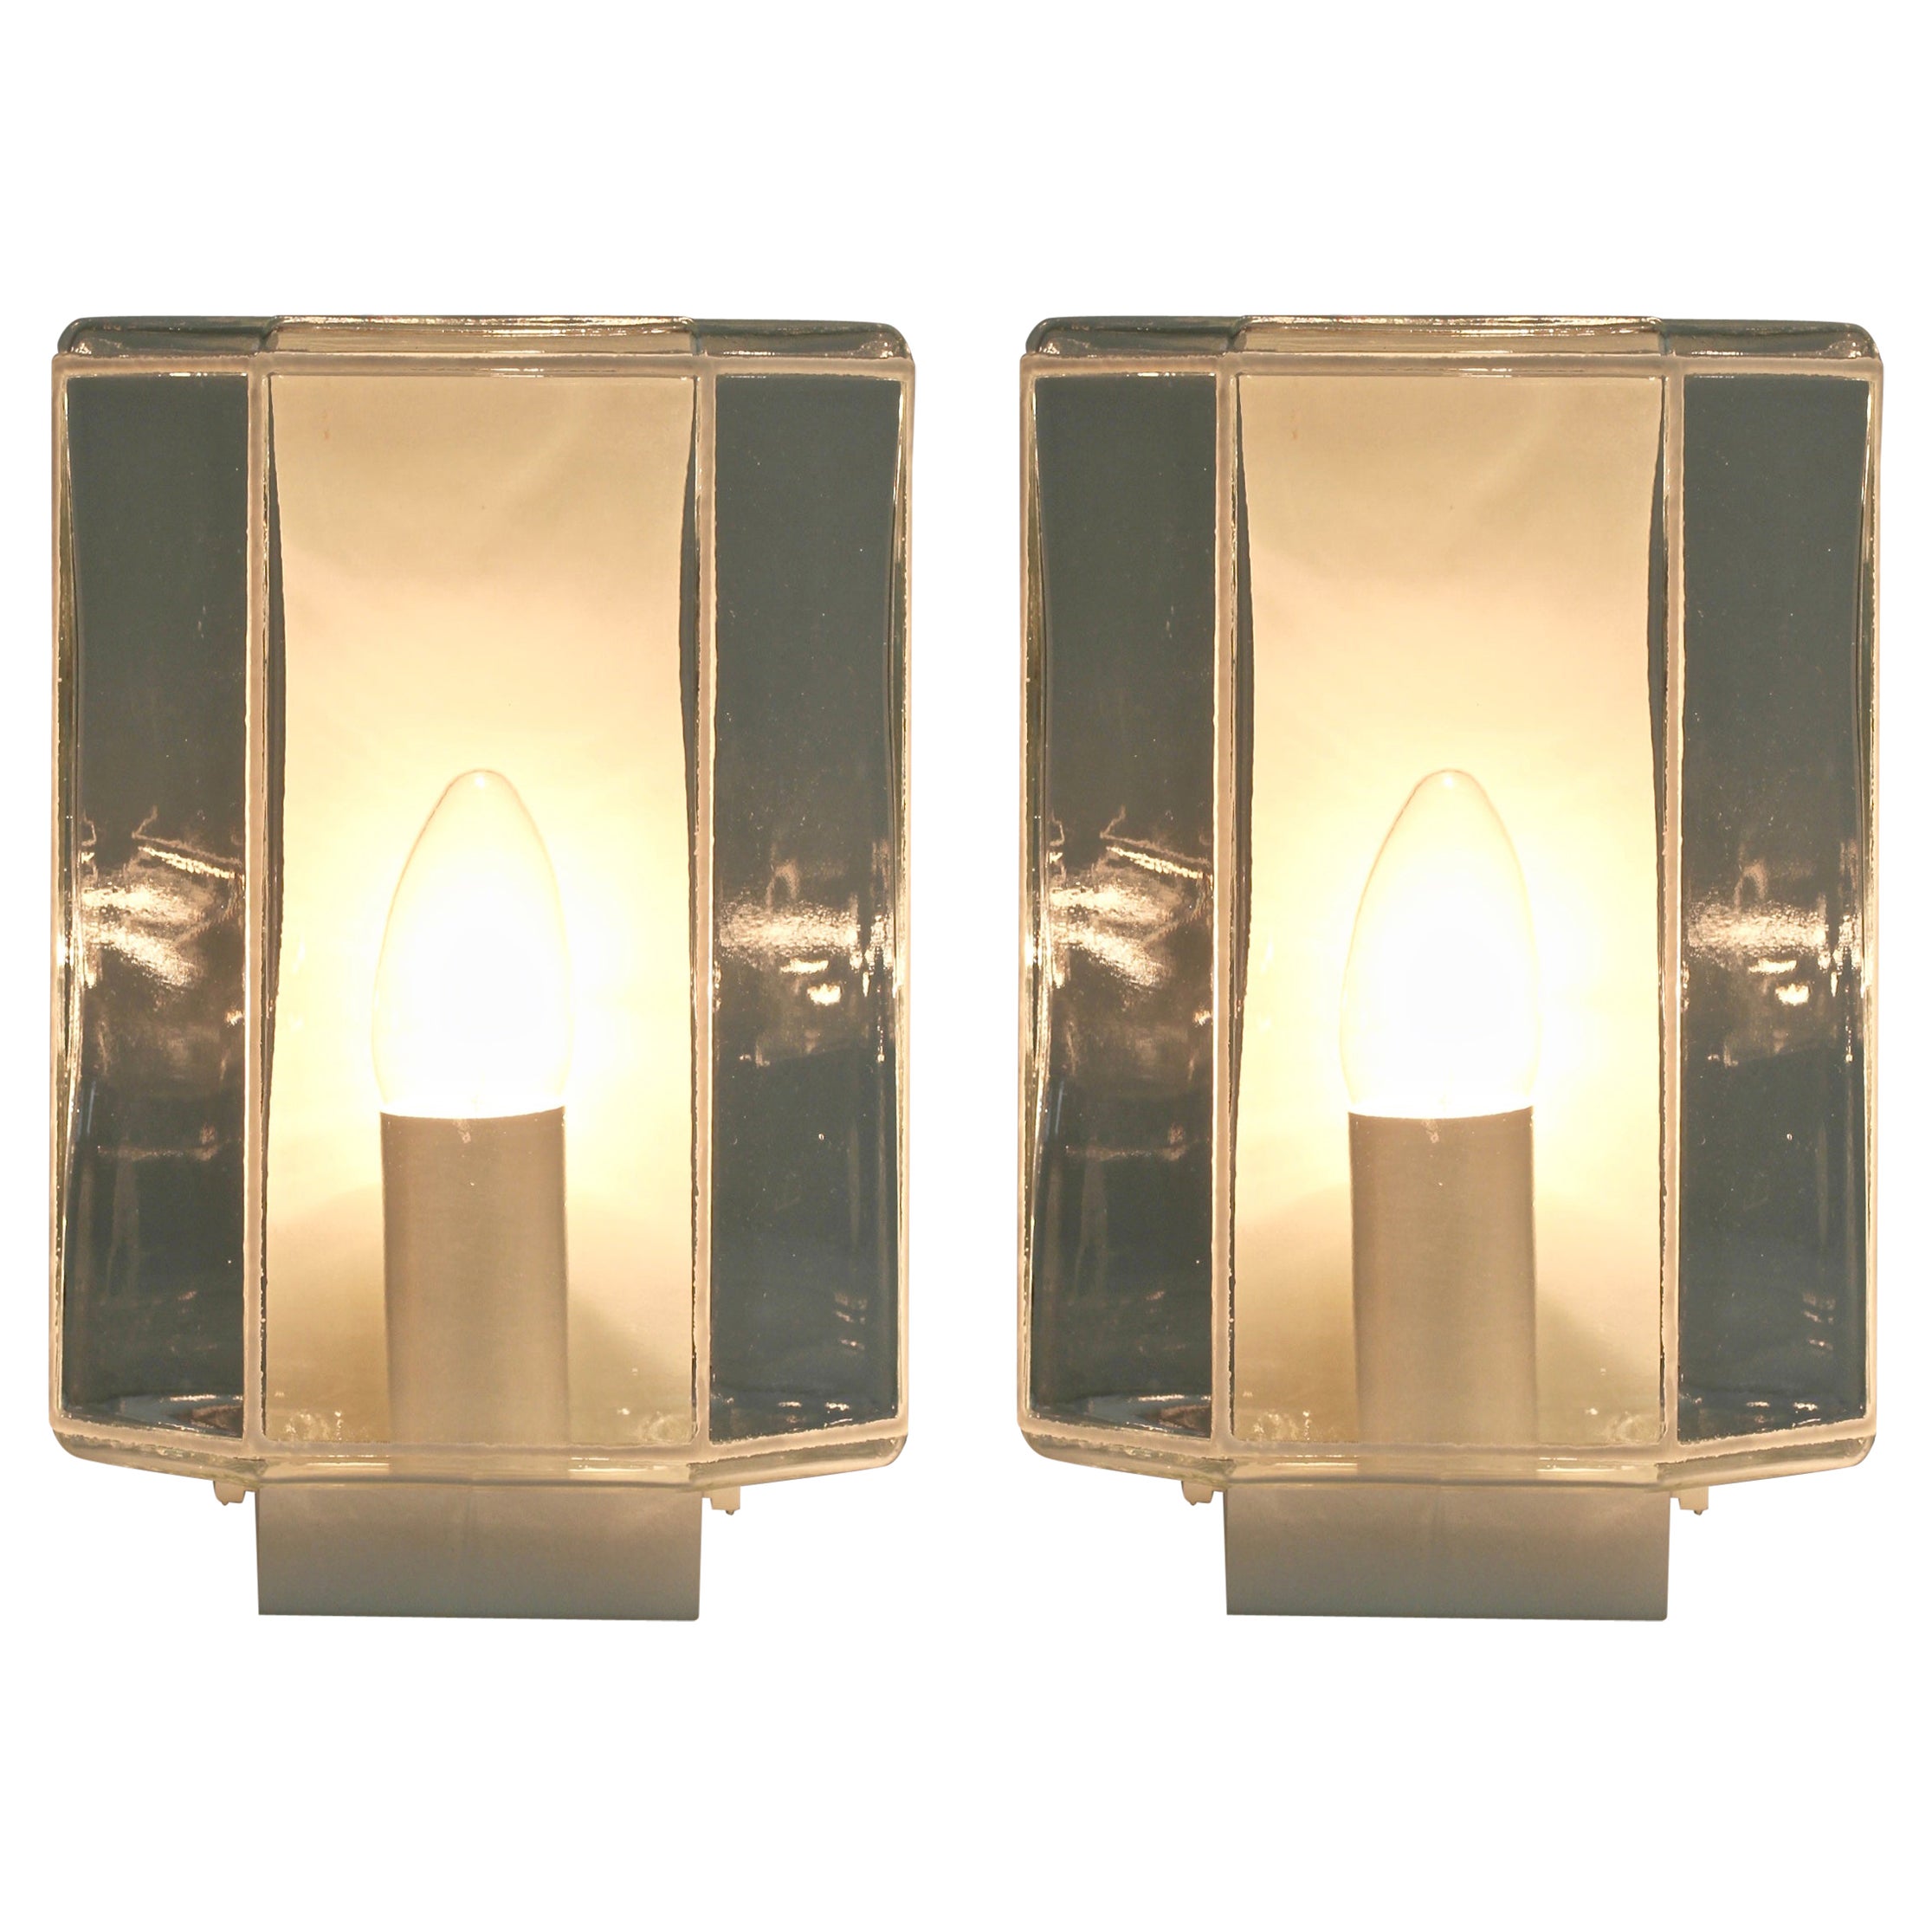 Limburg Pair of 1970s Minimalist White and Clear Glass Wall Lights Lamps Sconces